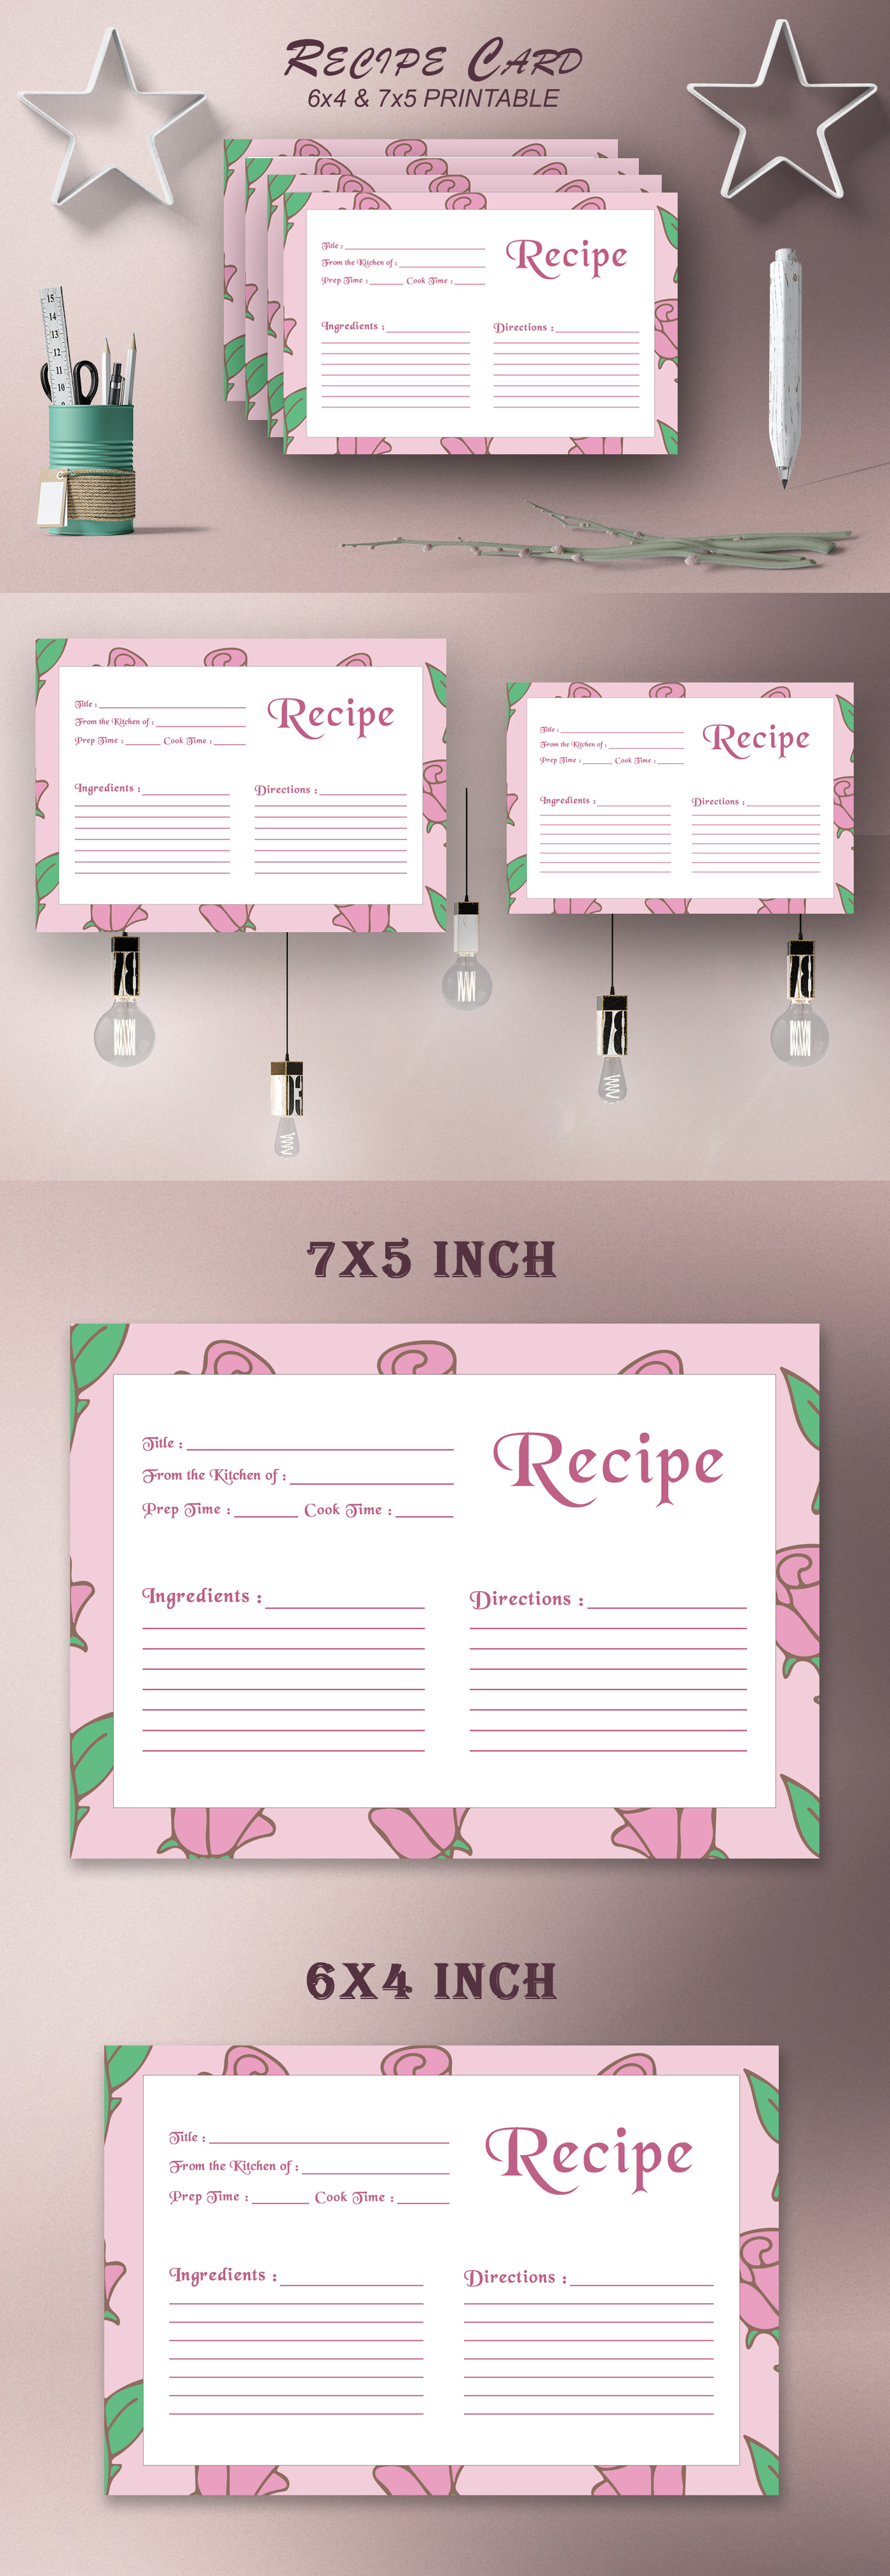 Free Recipe Card Printable Template V15 is a modern and sober recipe template for your work.